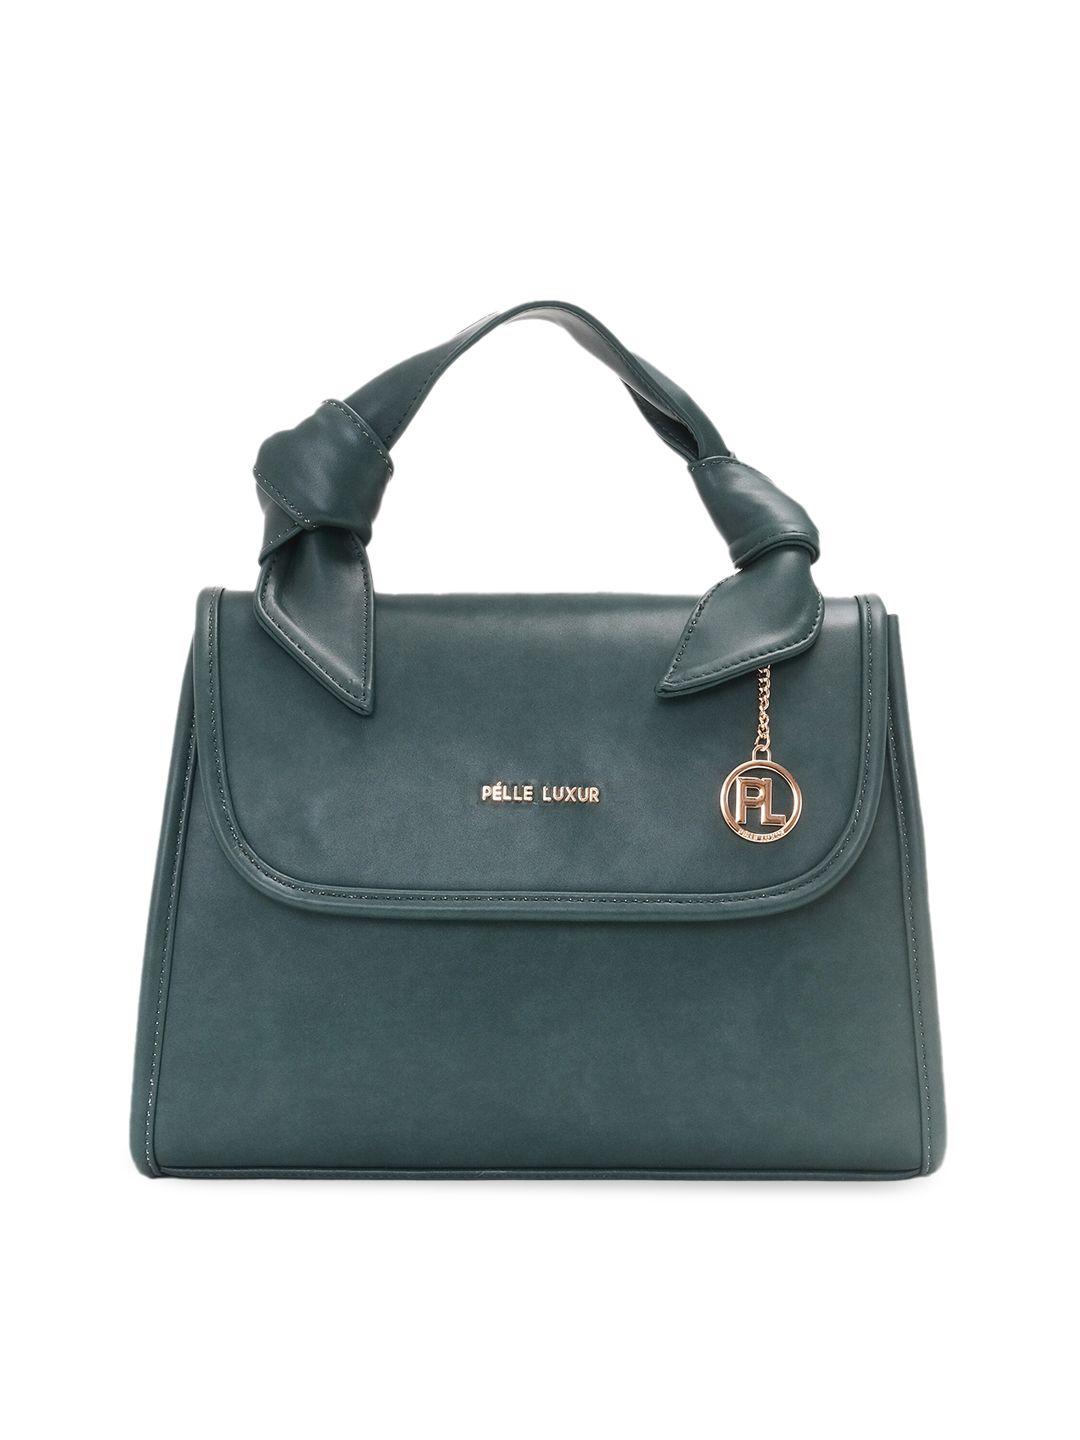 pelle luxur sea green leather structured handheld bag